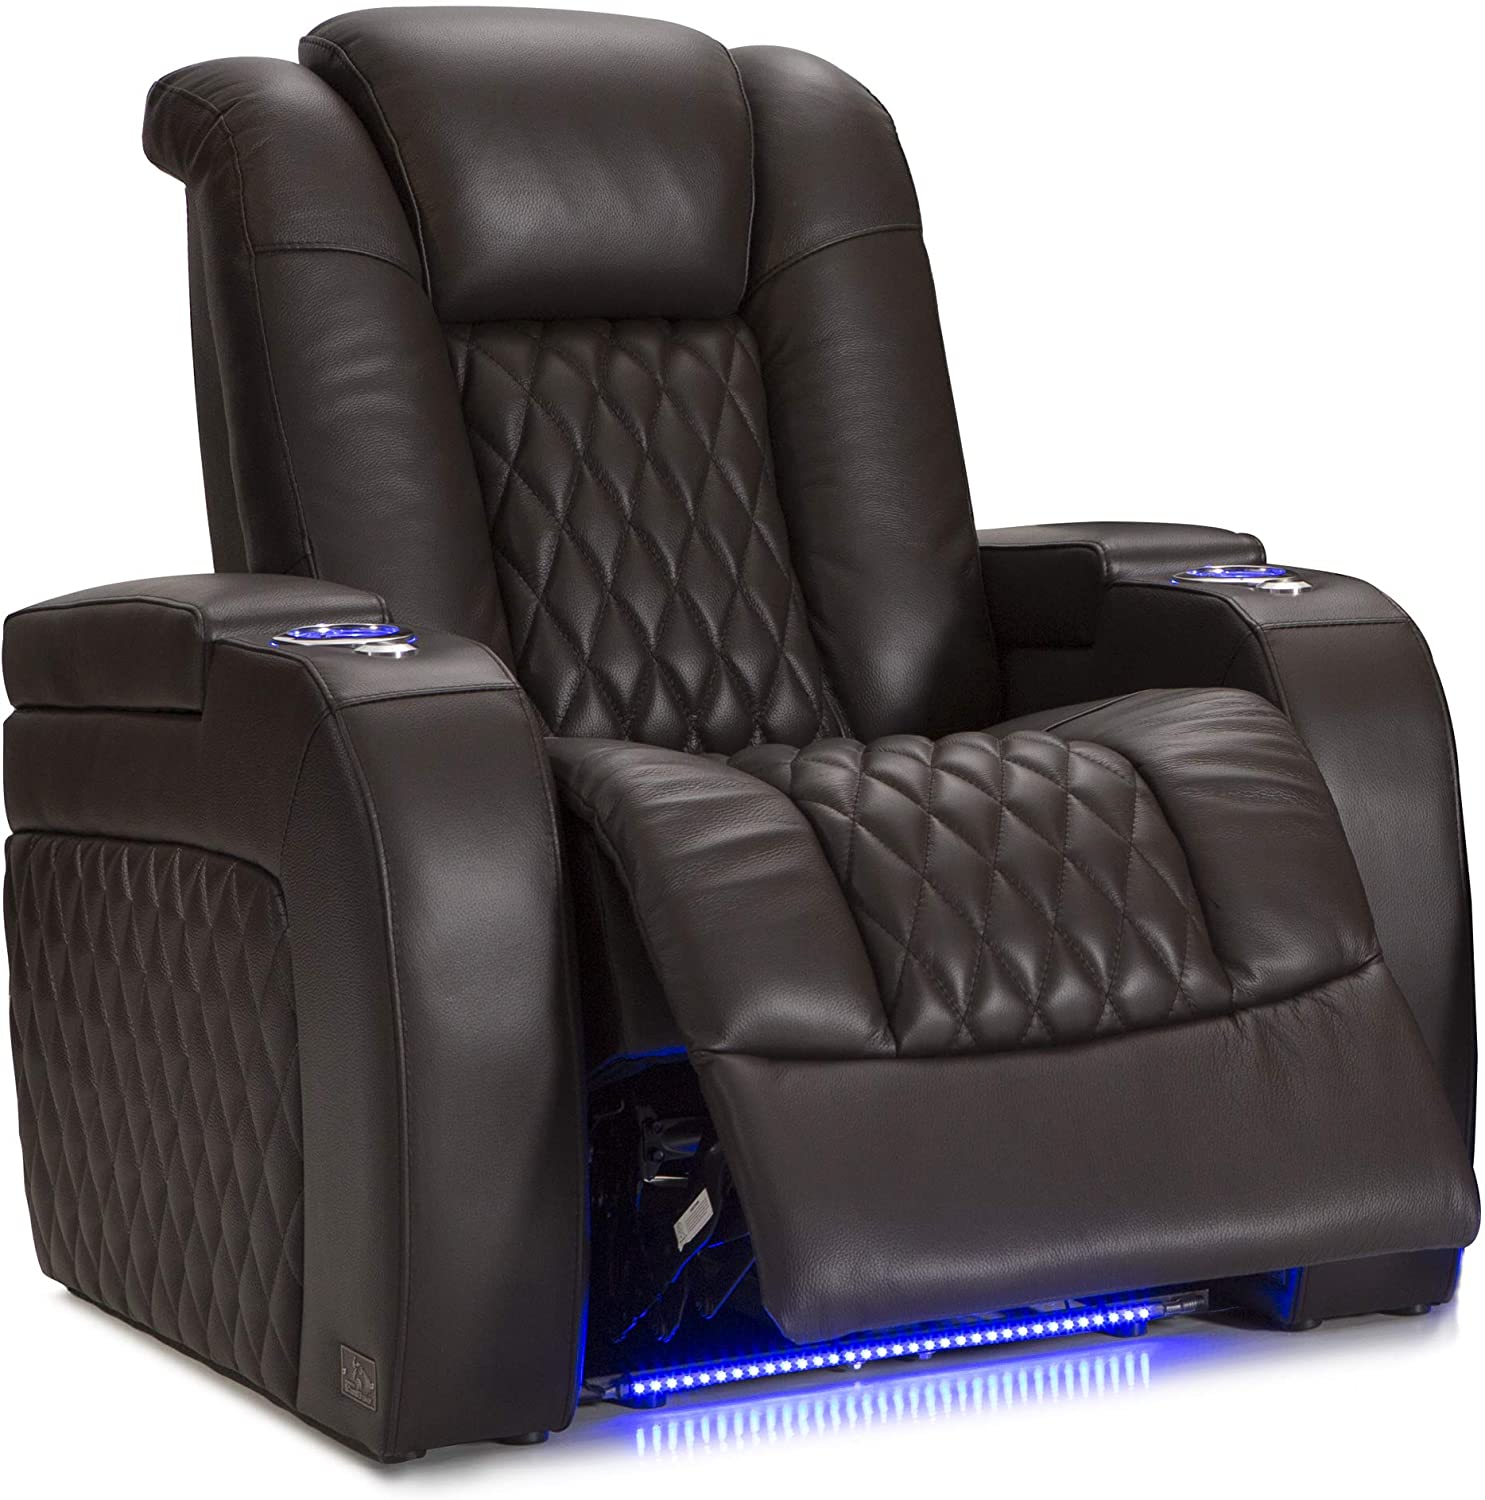 Seatcraft leather recliner